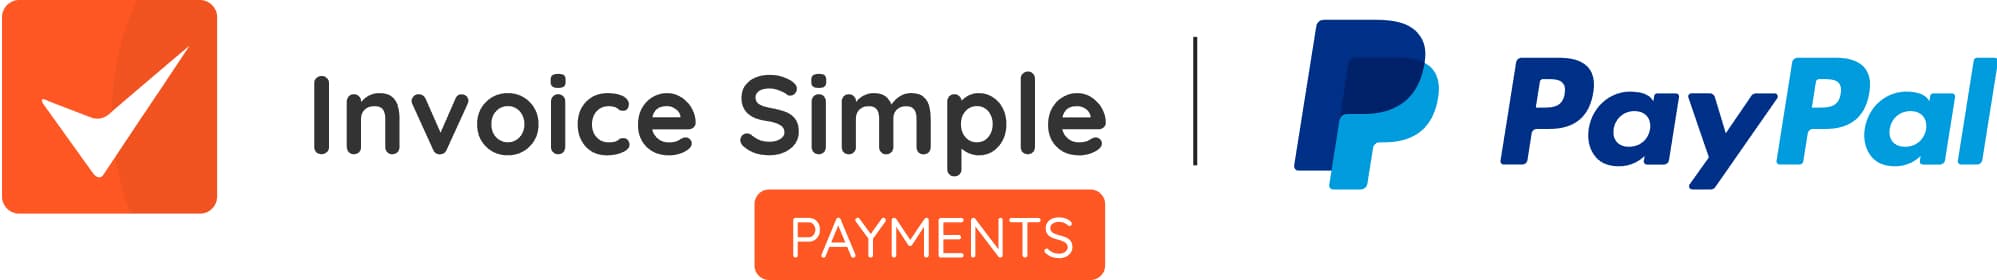 Invoice Simple & PayPal Logos